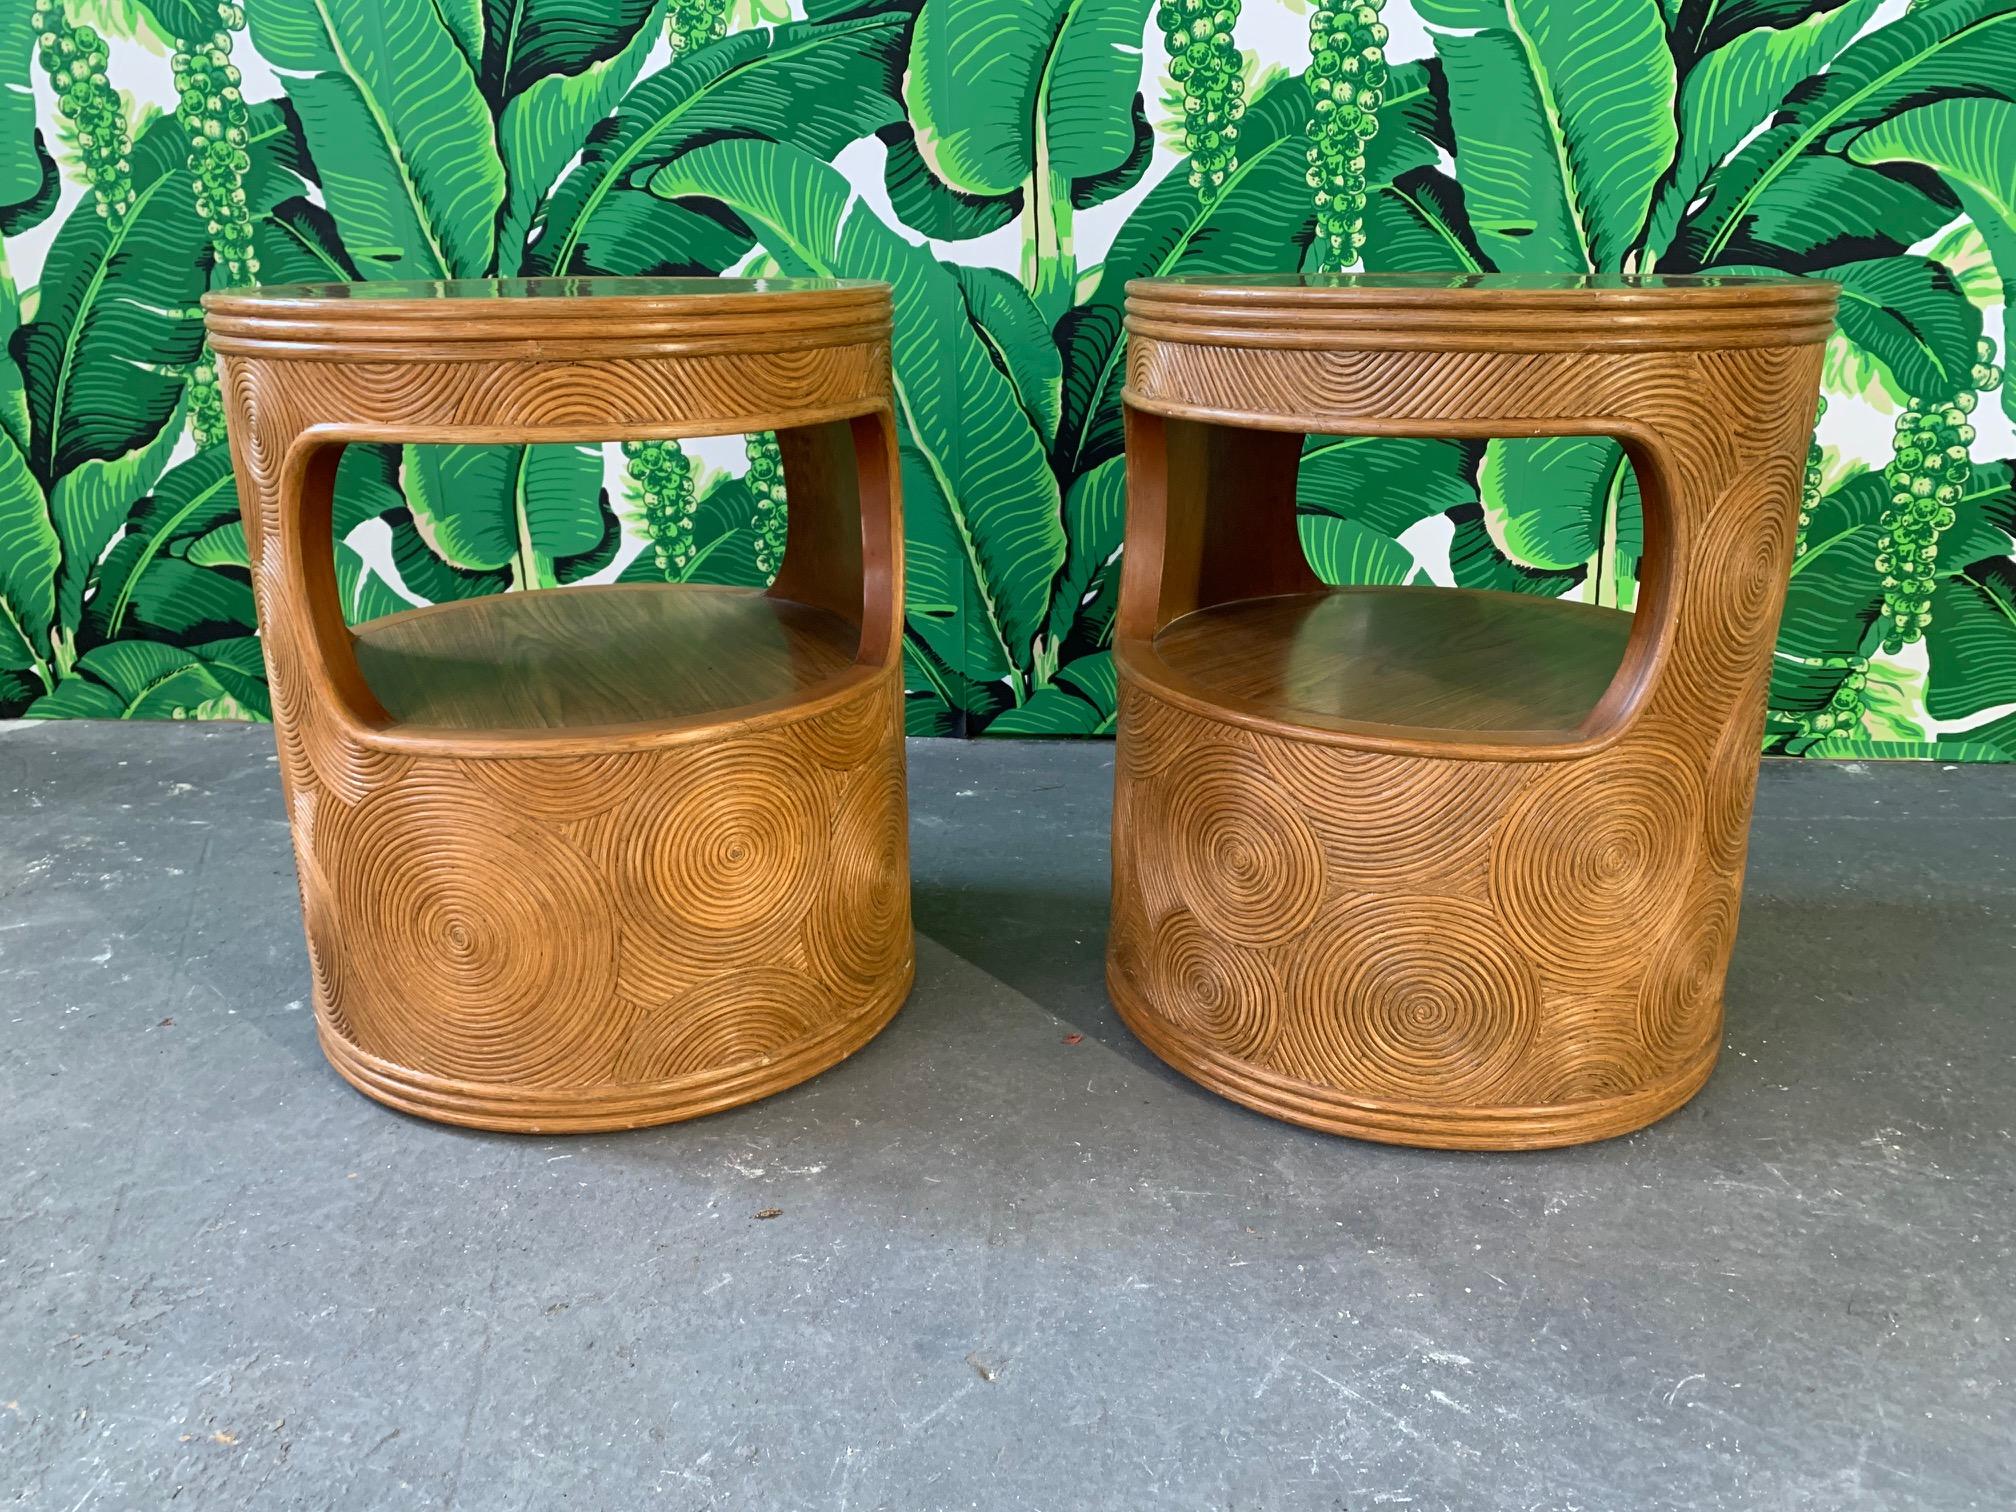 Pair of round side tables feature intricate split reed rattan. Very good vintage condition with only very minor signs of wear consistent with age.